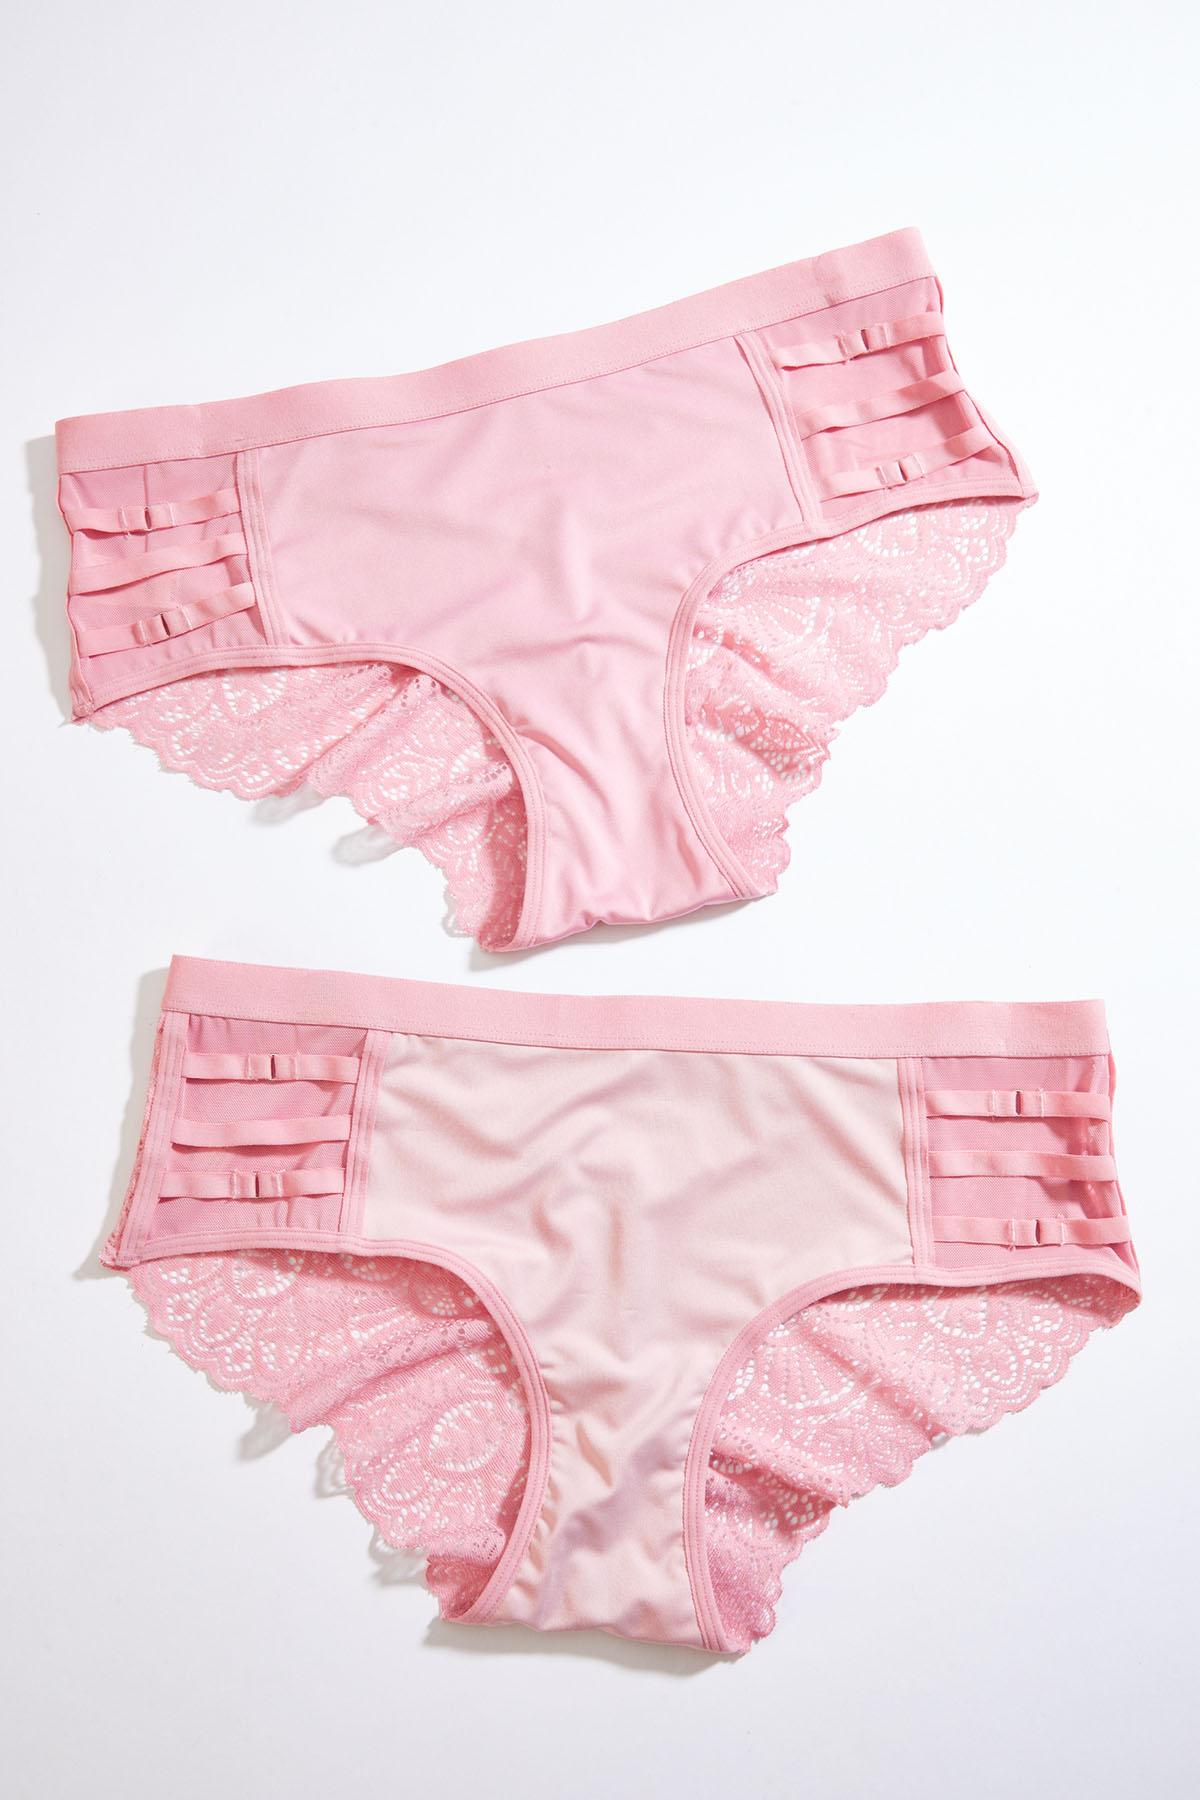 Cato Fashions  Cato Plus Size Pink Passion Hipster Panty Set